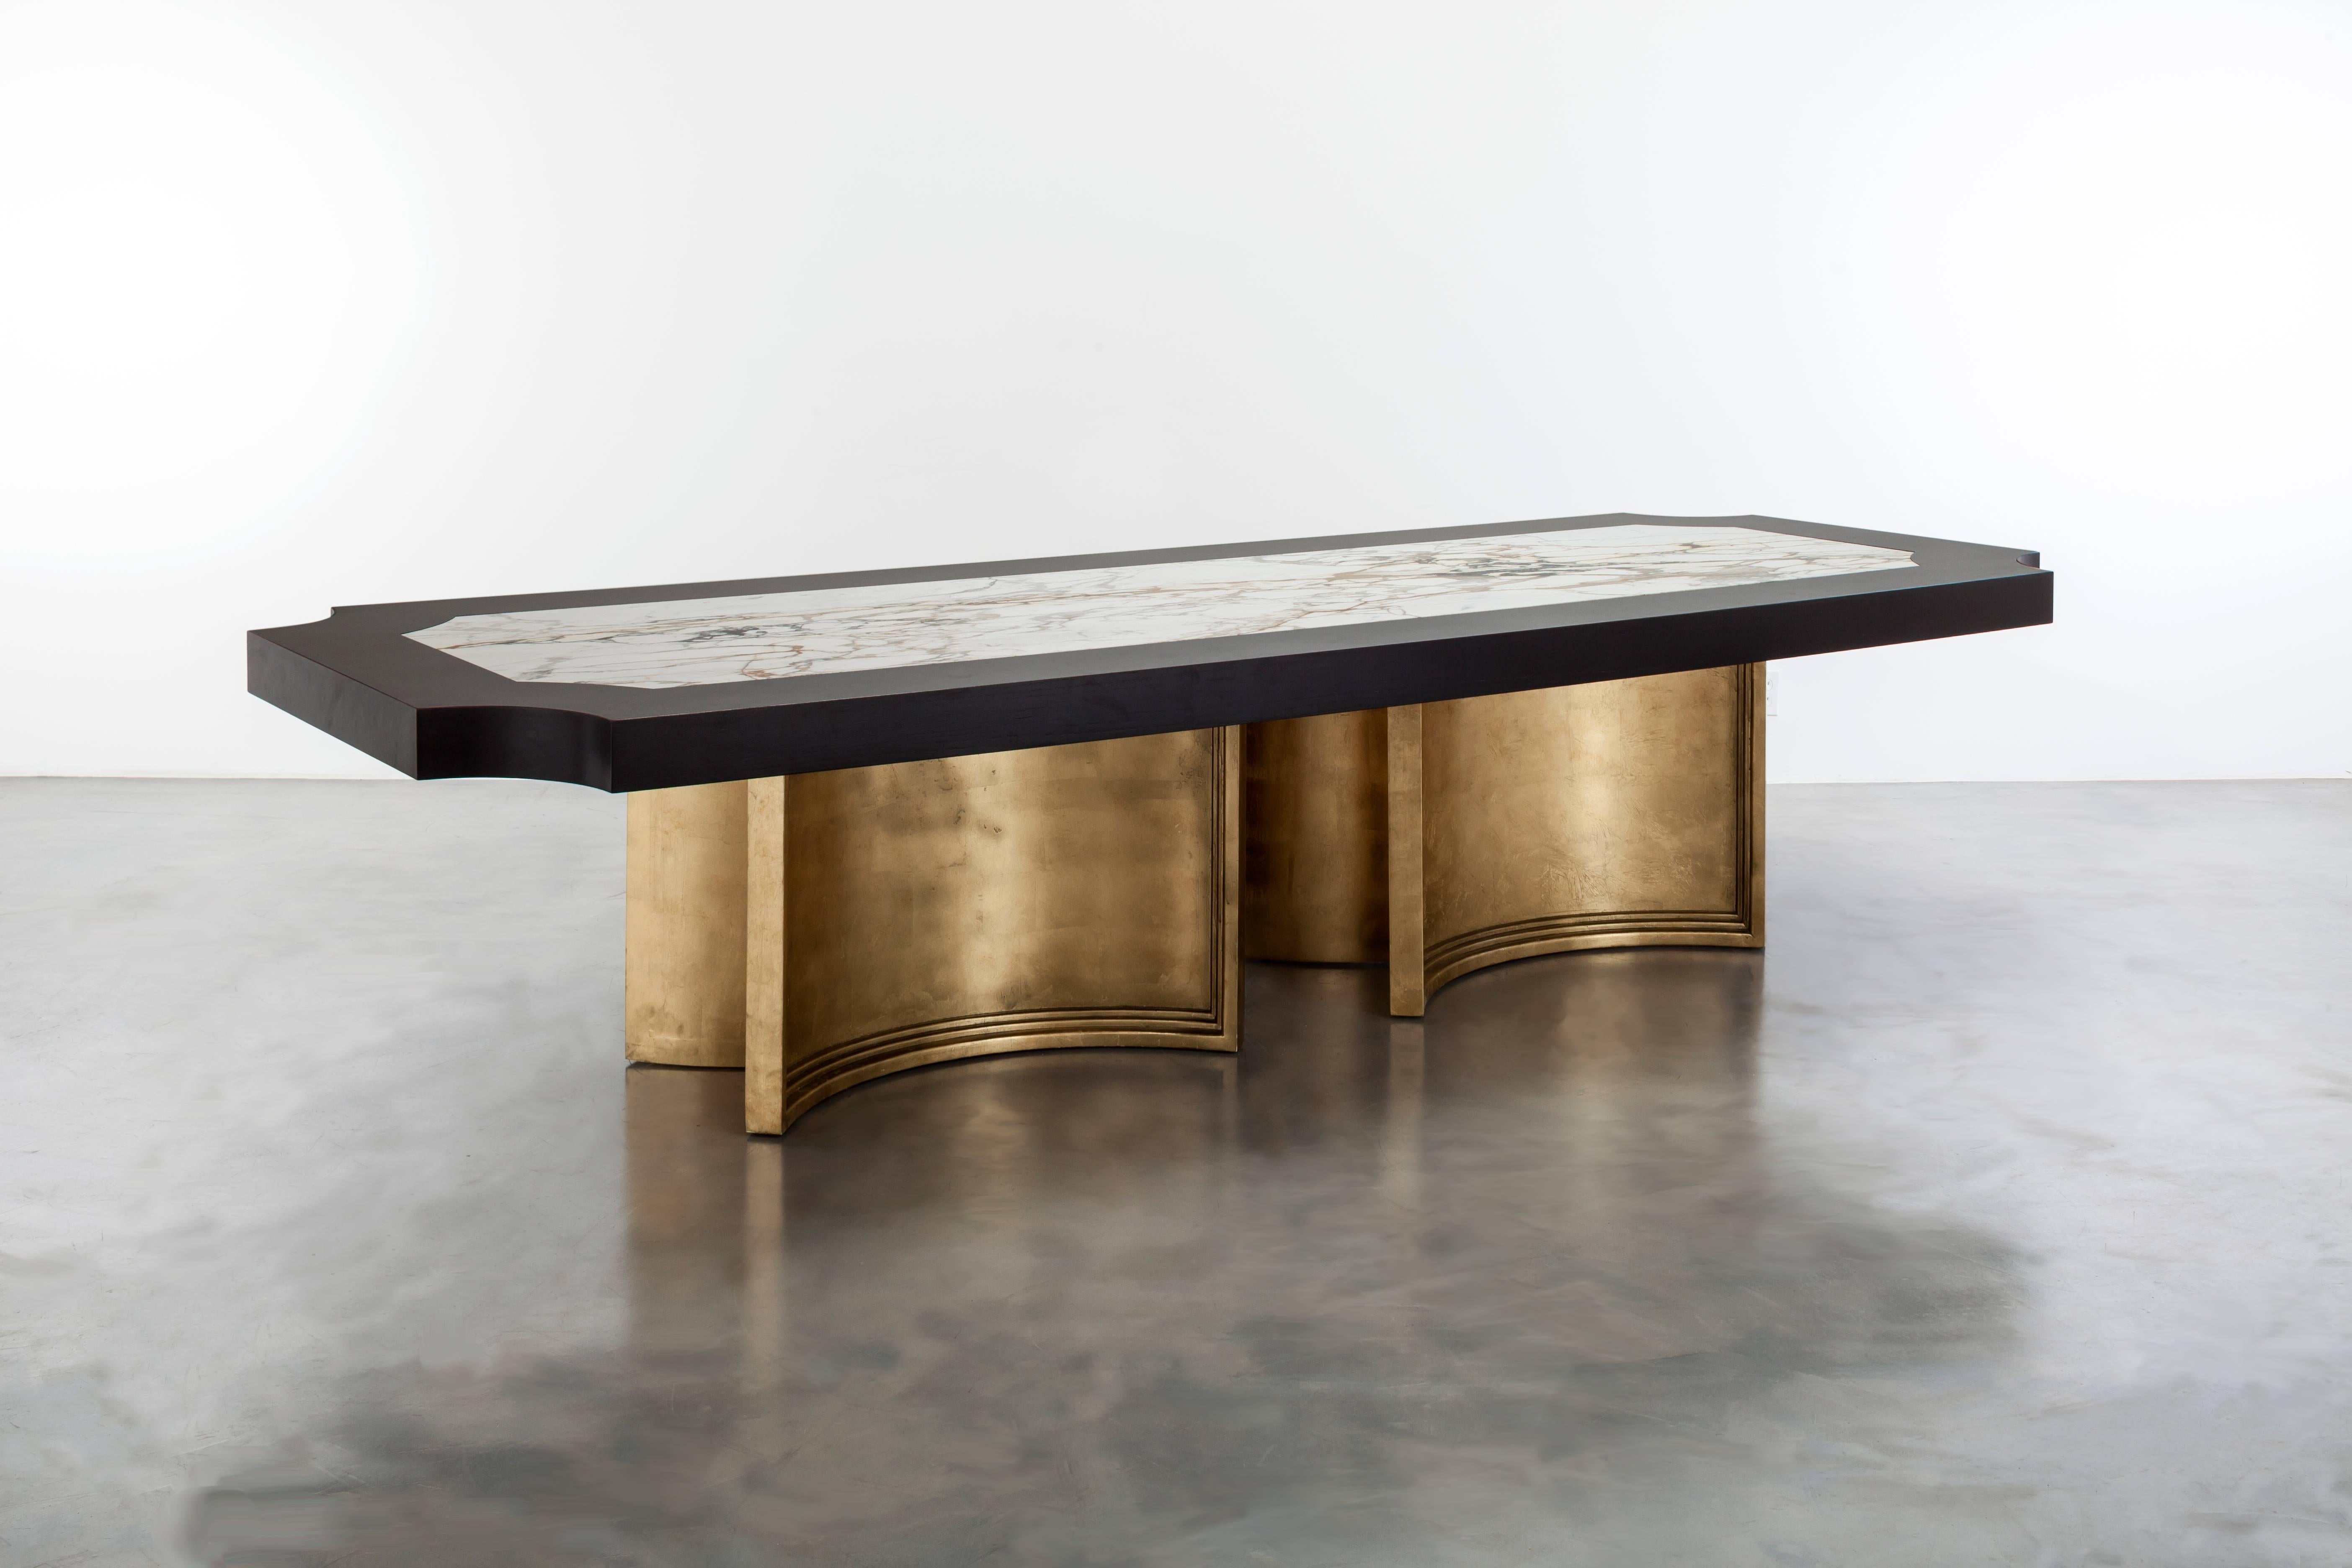 BRUSSELS DINING TABLE - Ebony Oak, Carrara Marble and Gold Leafed Modern Table

The Brussels dining table is a luxurious and modern piece of furniture that is perfect for any contemporary dining space. It is made to order in California and fully